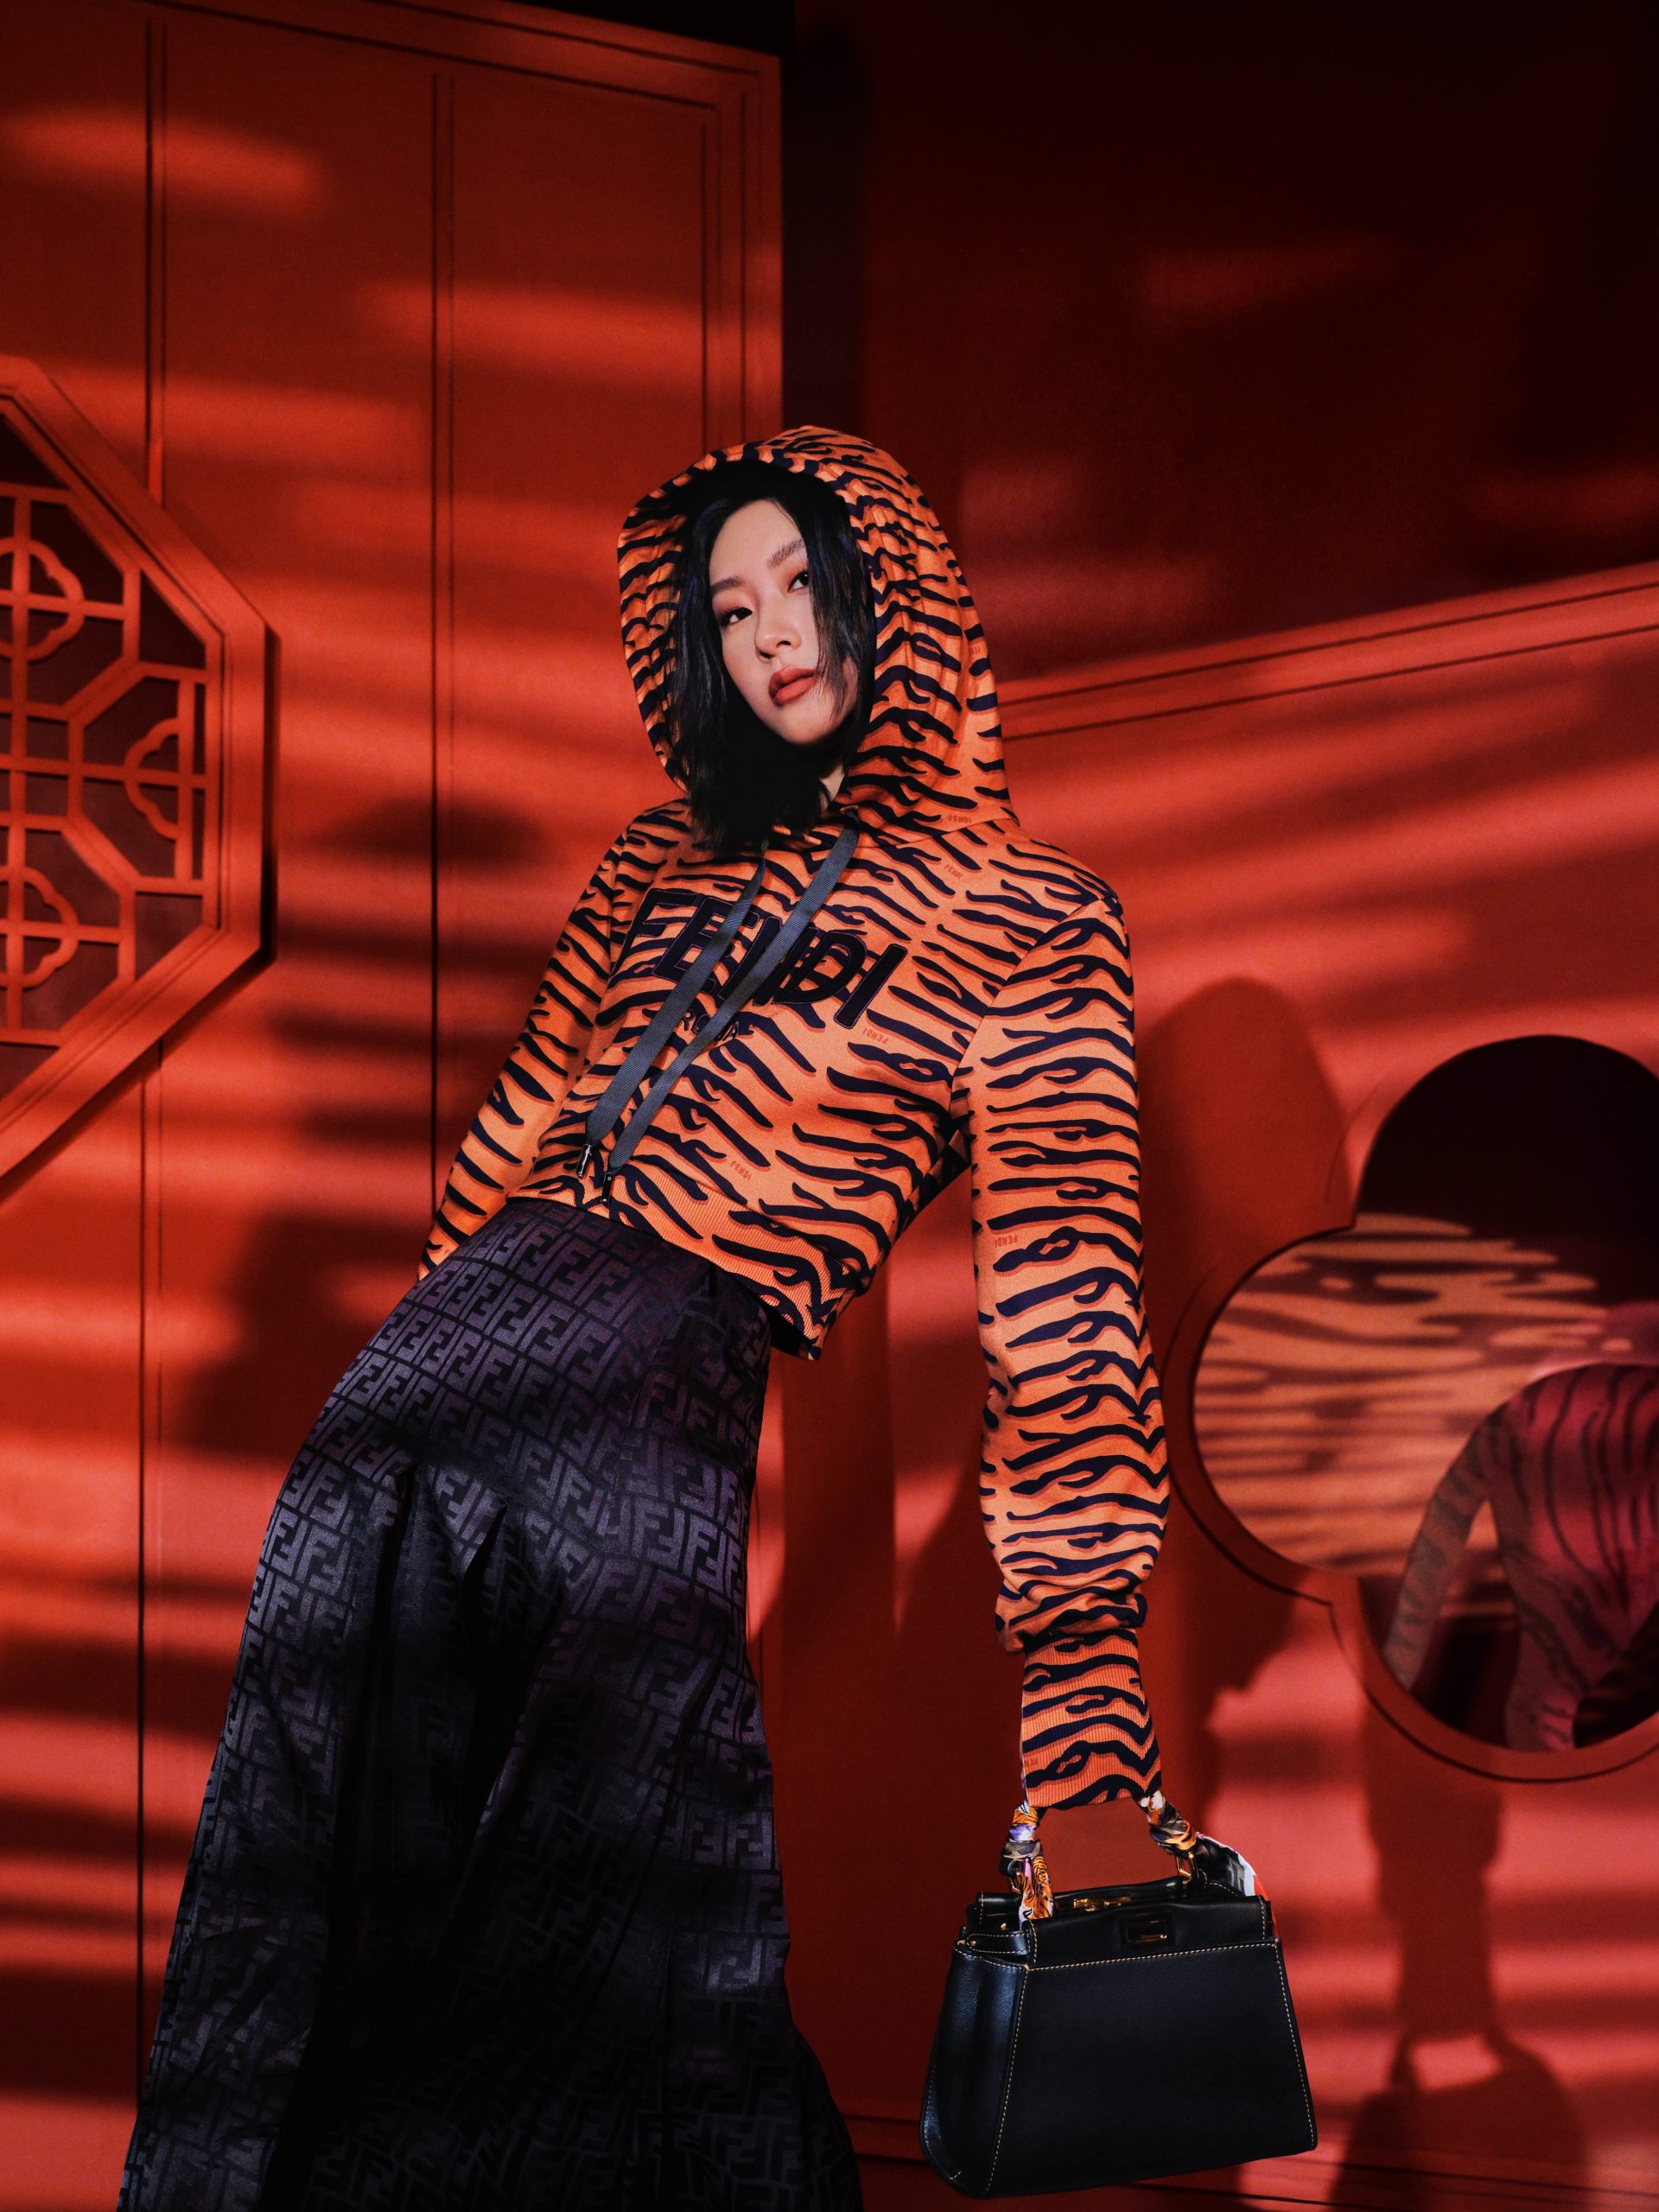 FENDI Celebrates Lunar New Year with the 2022 Spring Festival Capsule Collection!